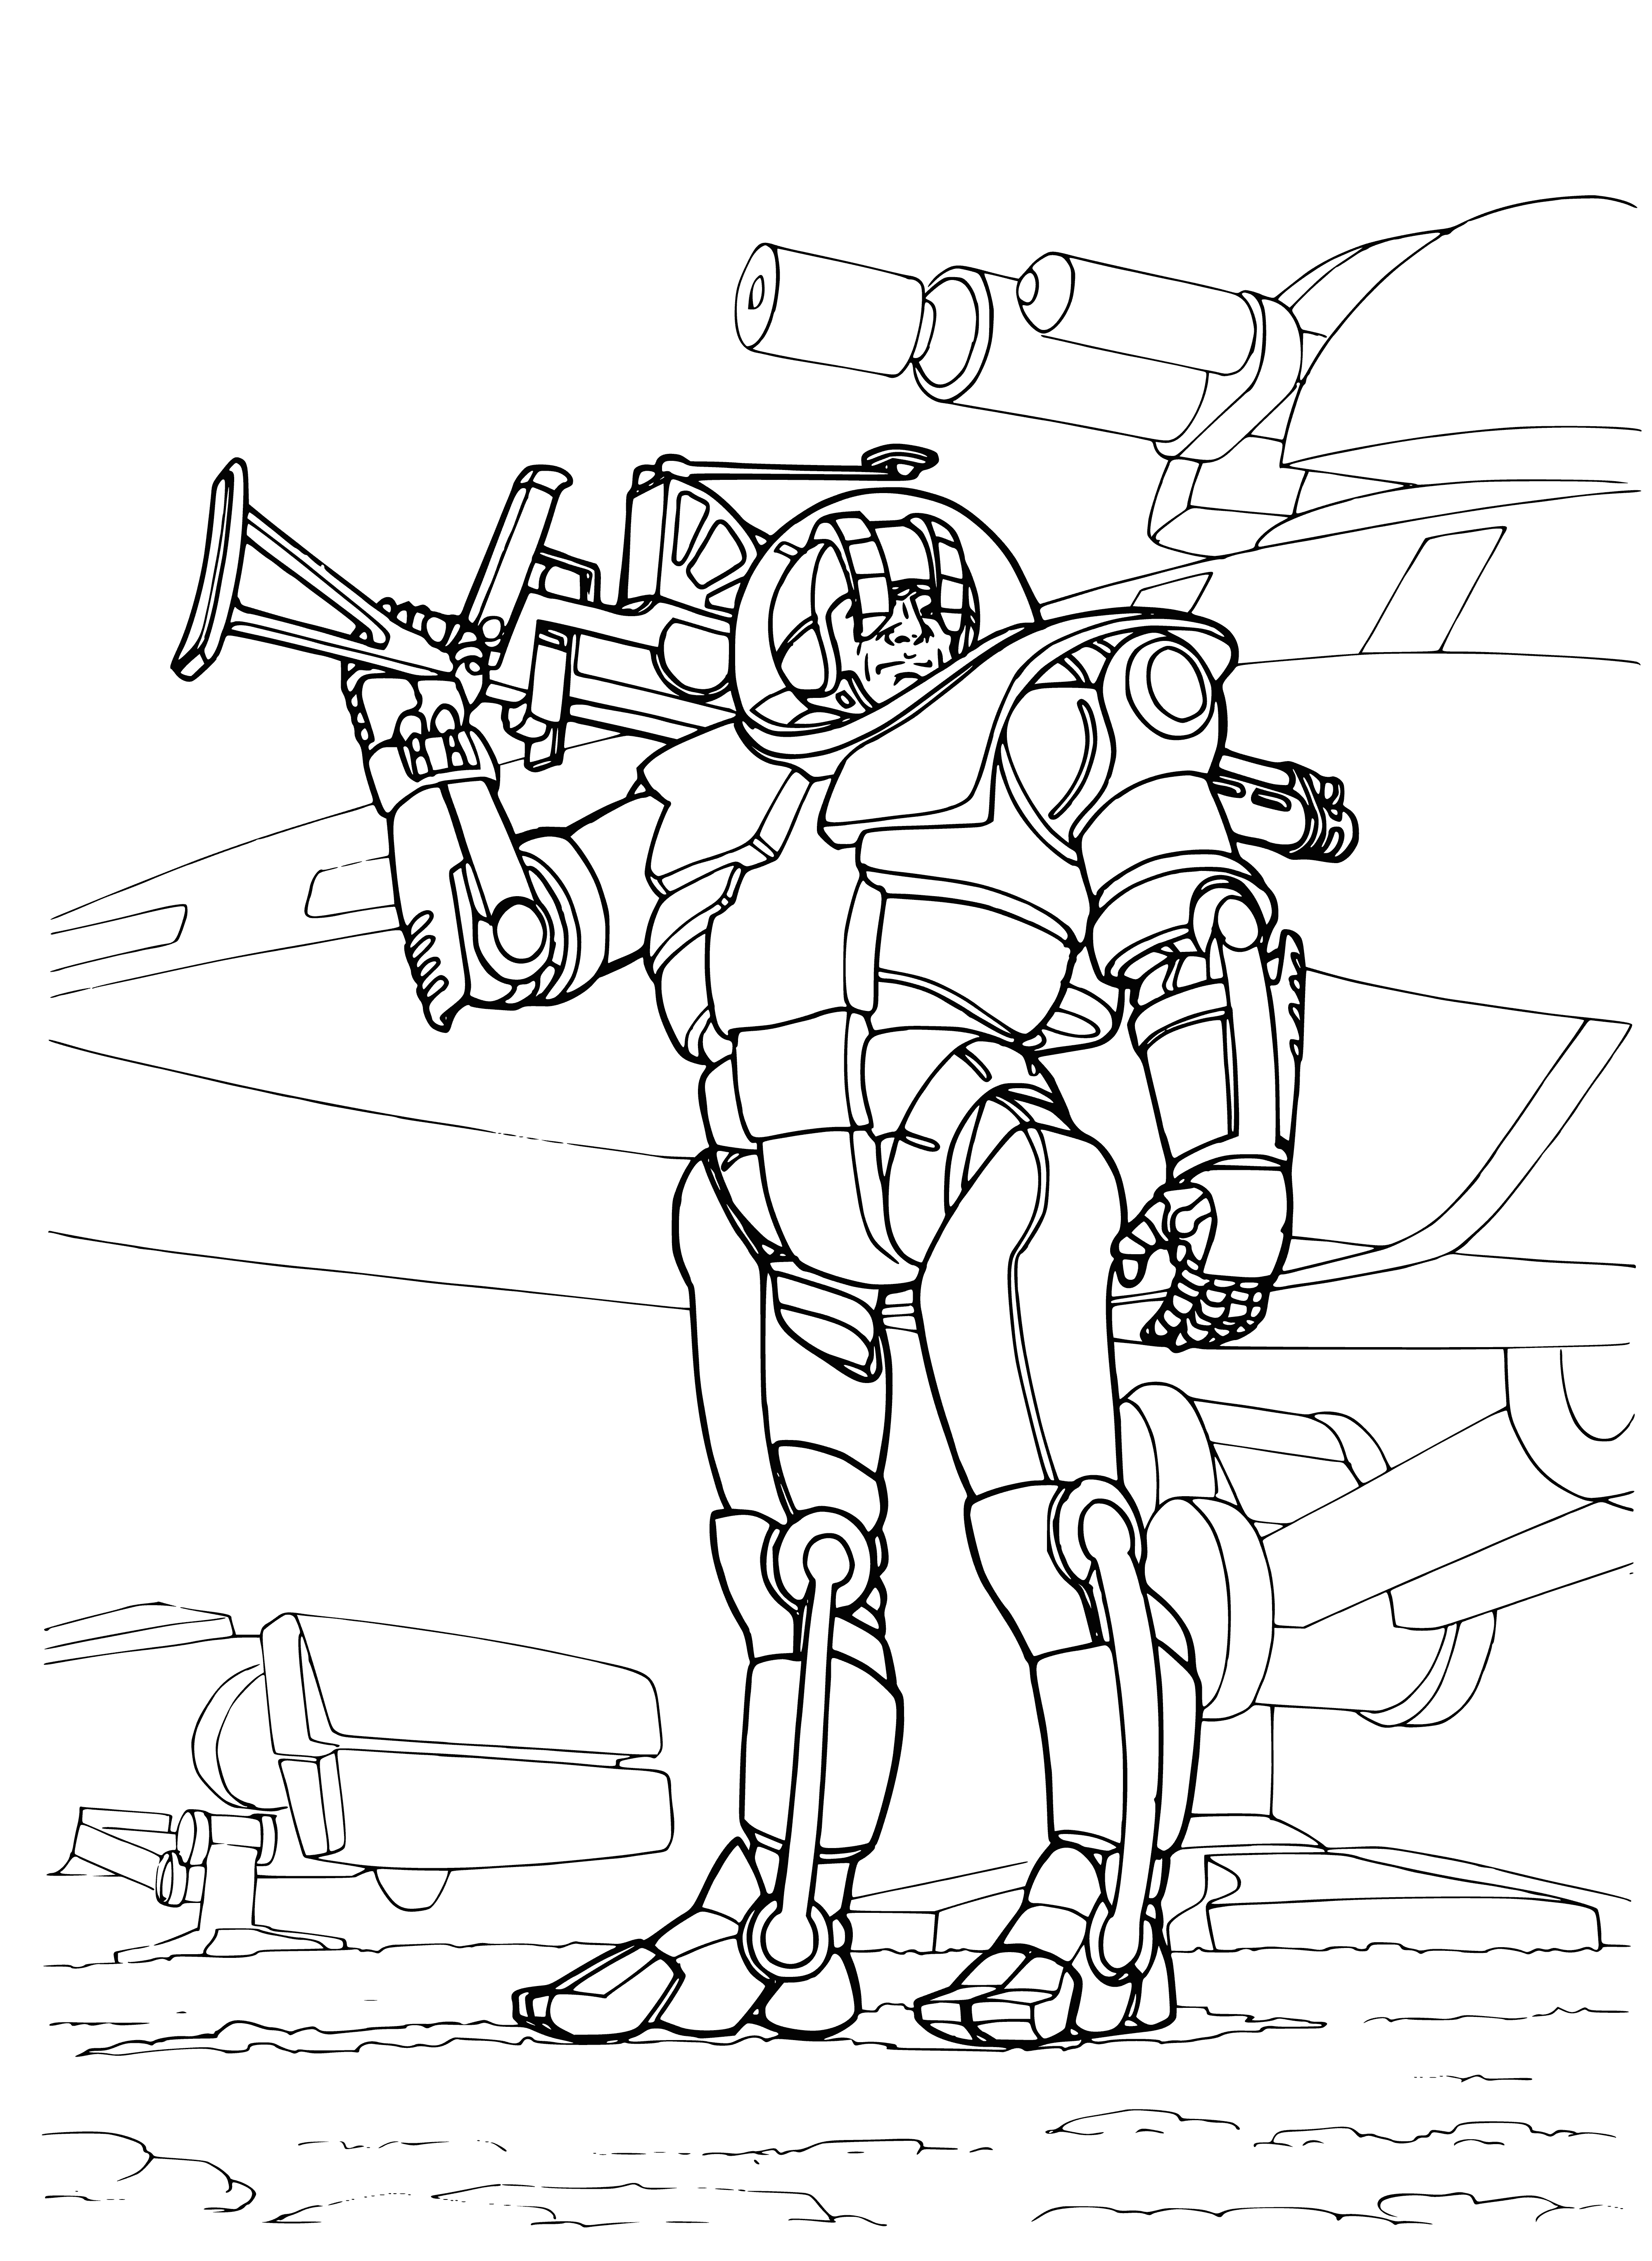 coloring page: Future wars will be fought by highly-trained fighters armed with advanced tech & weaponry, able to communicate & move quickly with extensive intel.